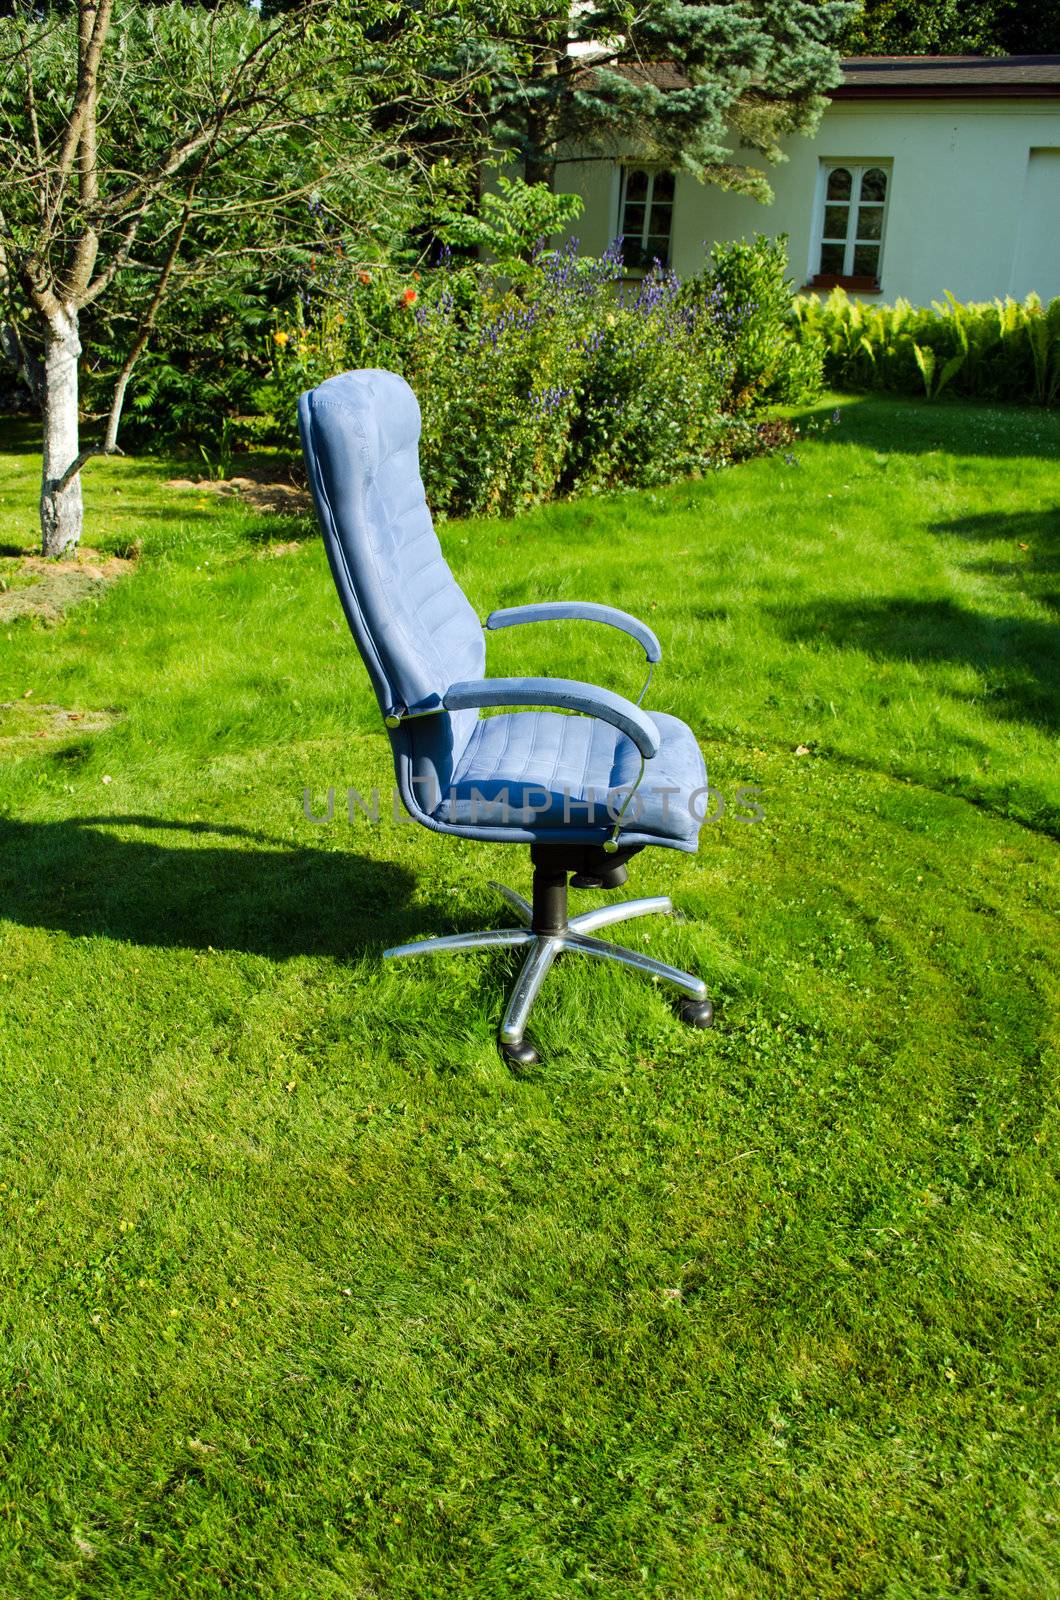 Boss chief office chair in garden and lawn grass cut arround it.